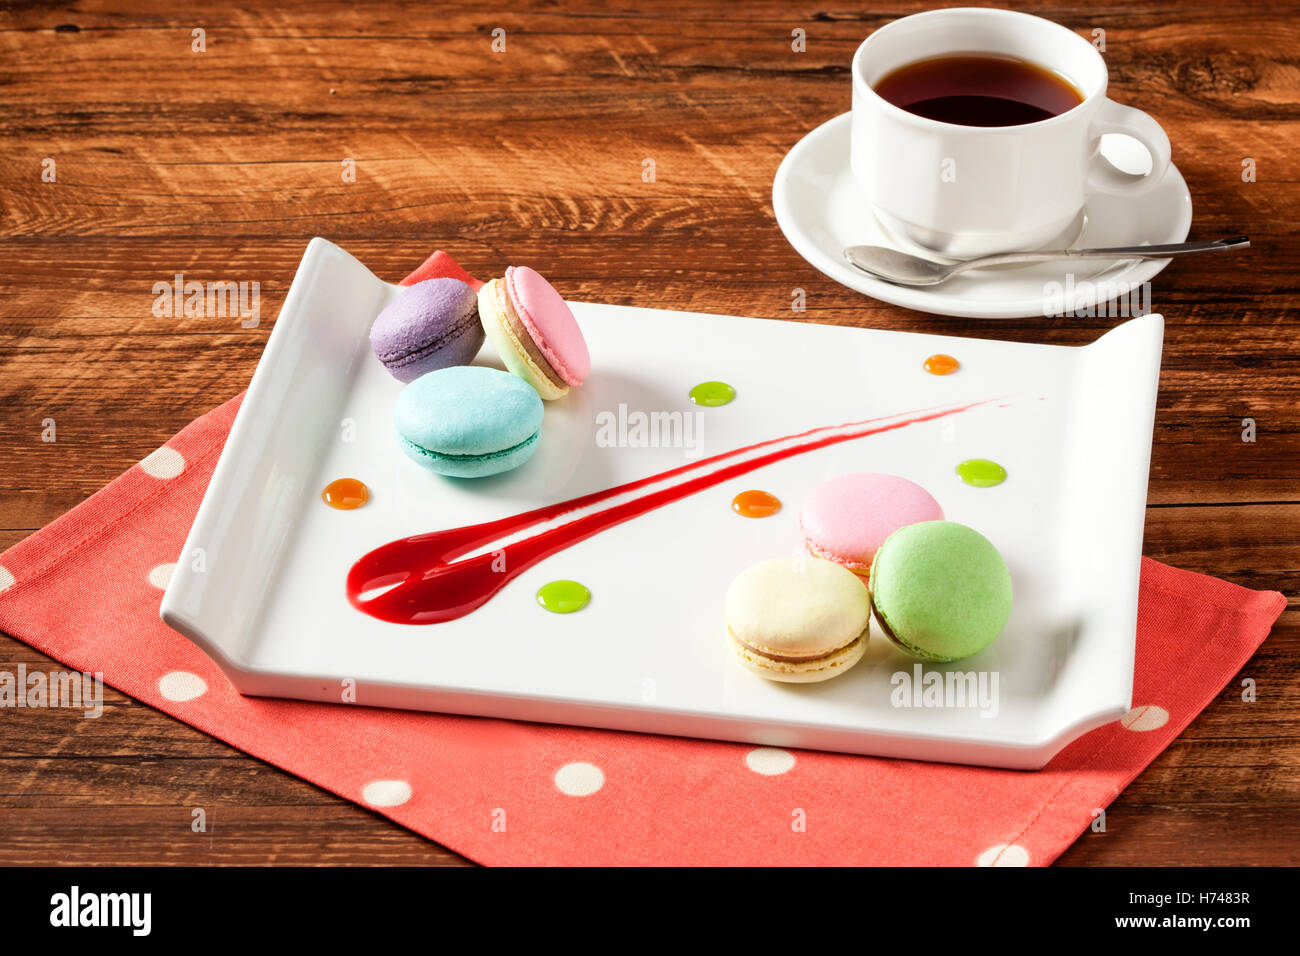 Colorful macaroon with black coffee on wooden table Stock Photo